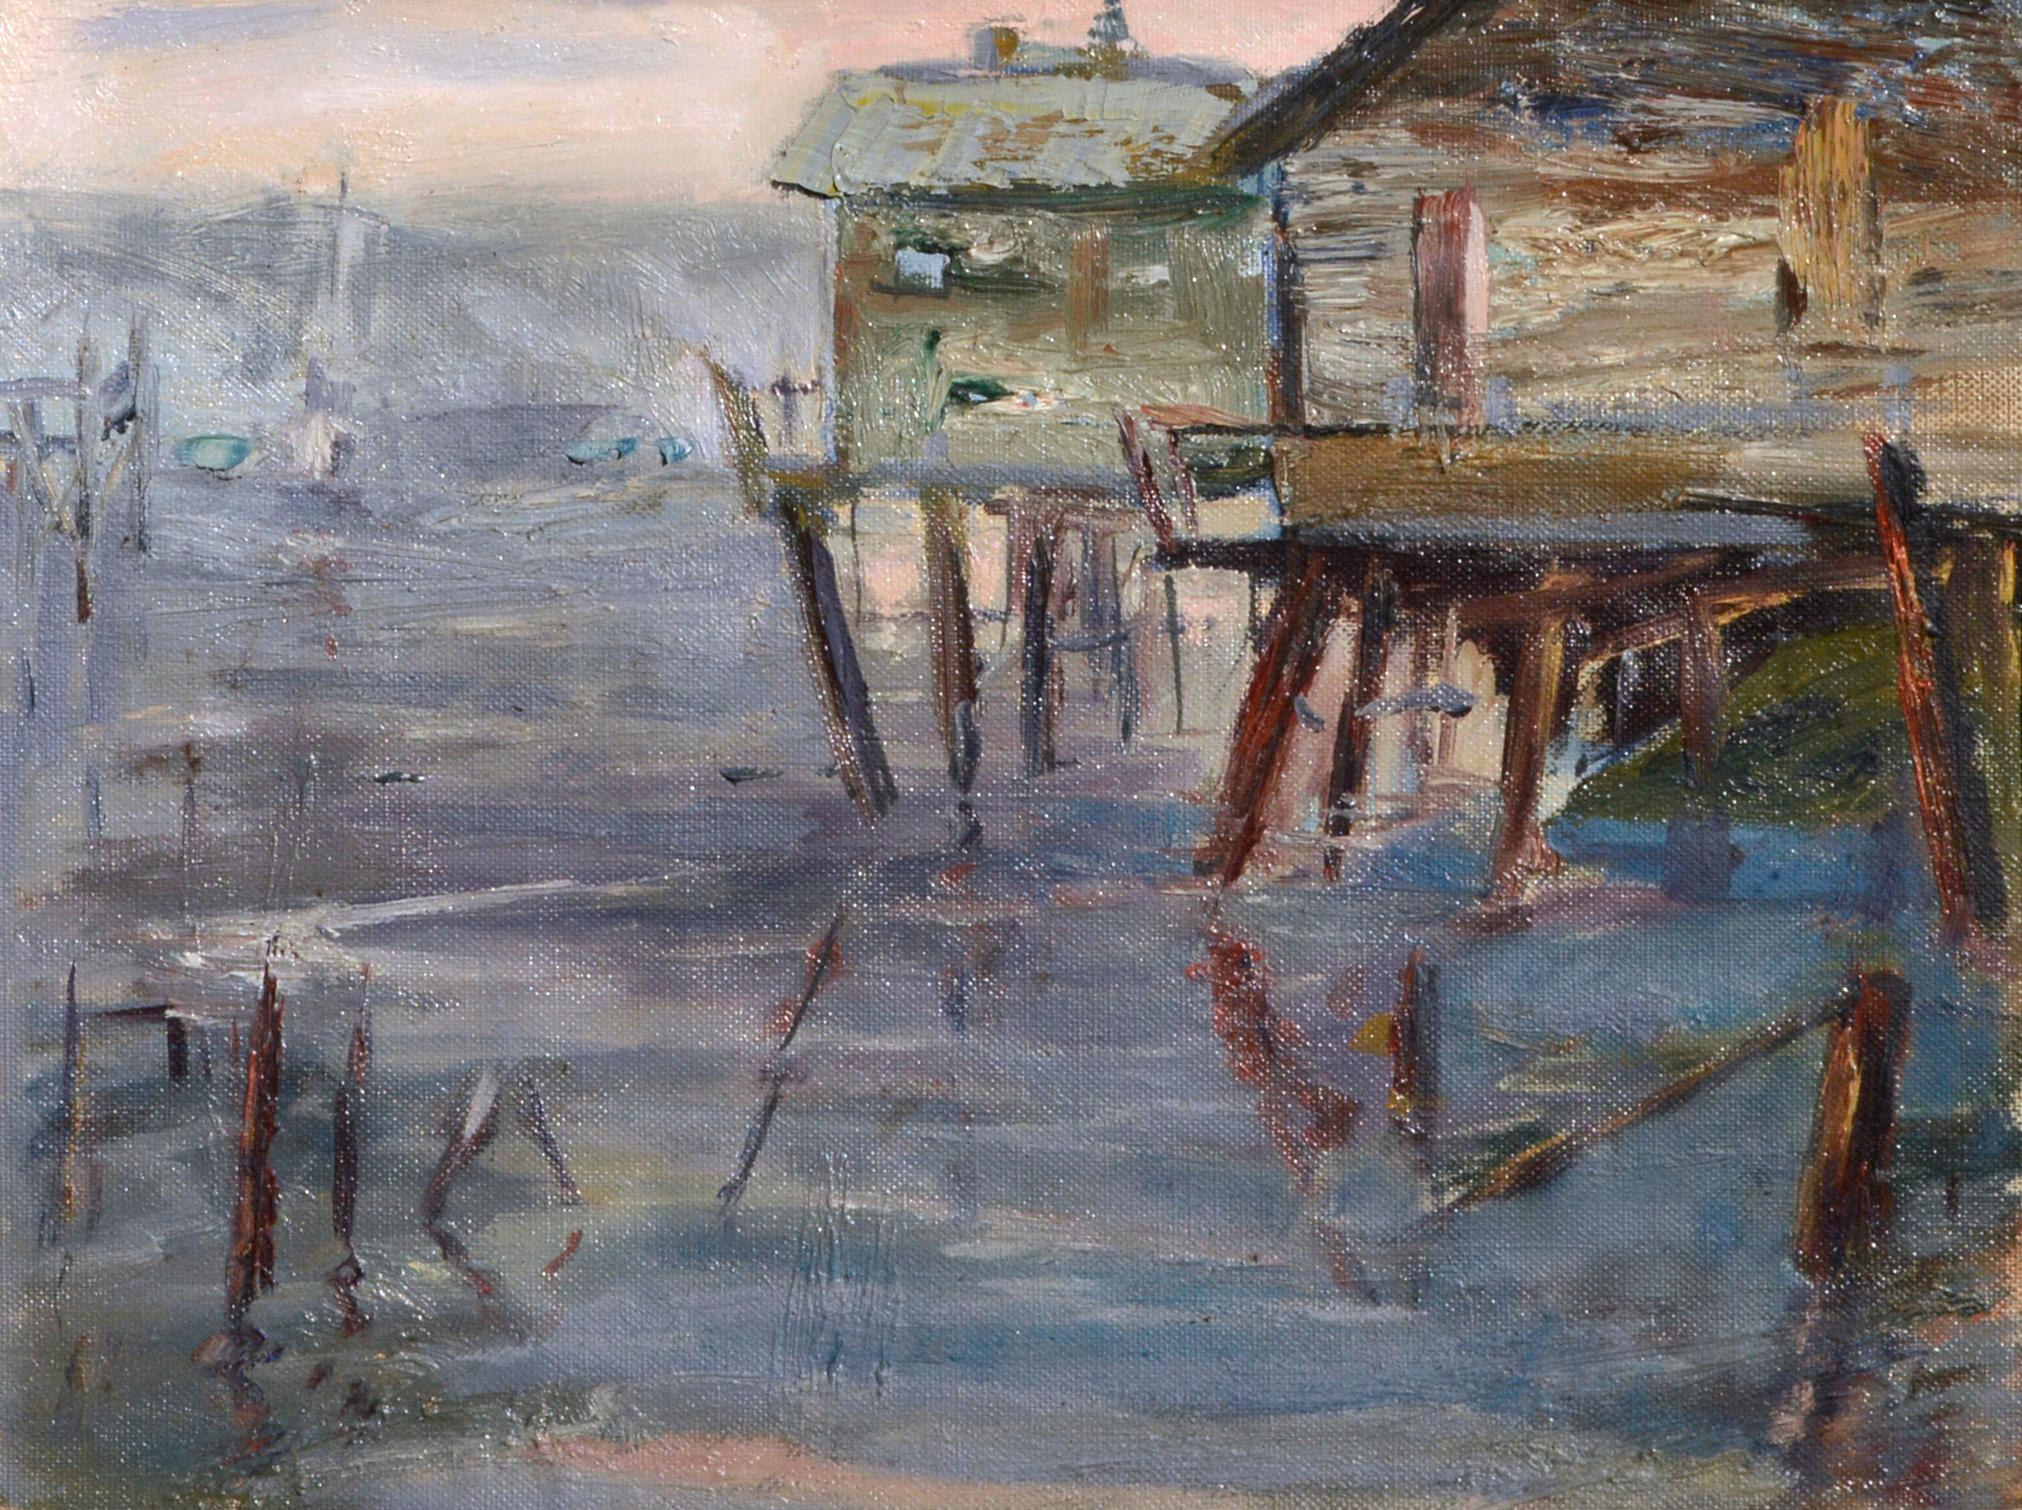 Abstracted Monterey Wharf, Shacks on the Dock Landscape  - Painting by Unknown